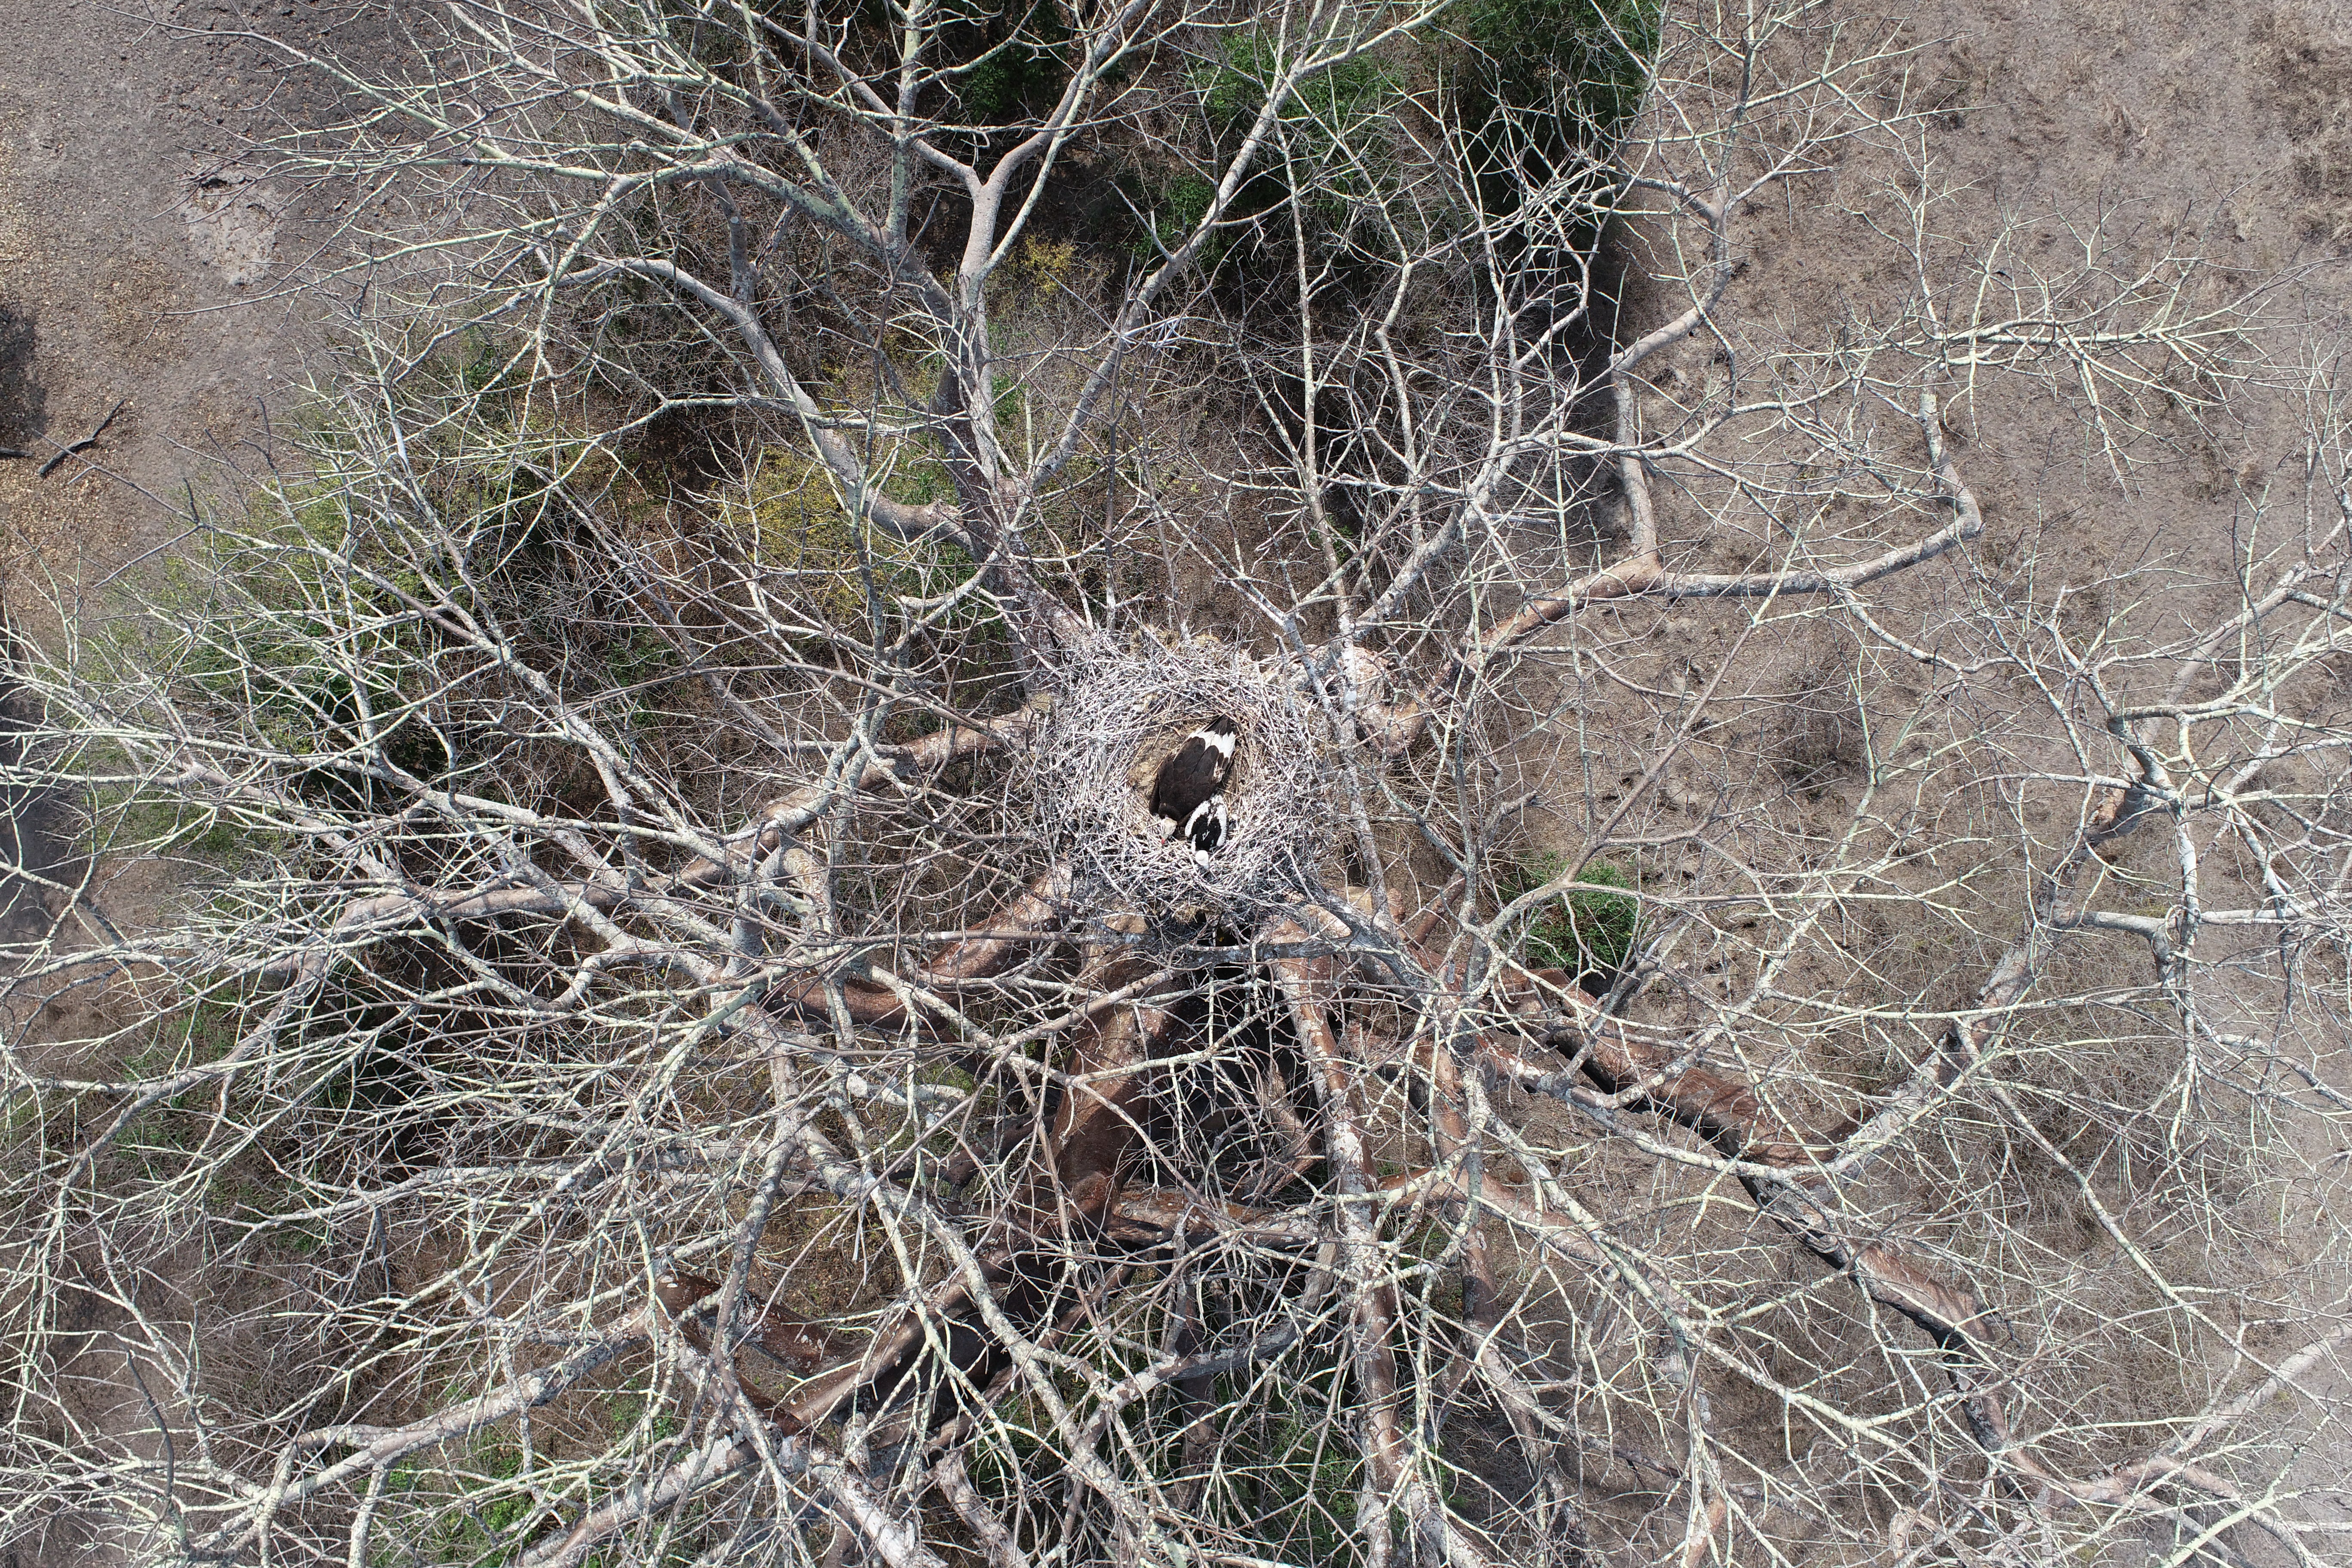 Aerial view of huge tree with large stick nest containing 2 large birds.